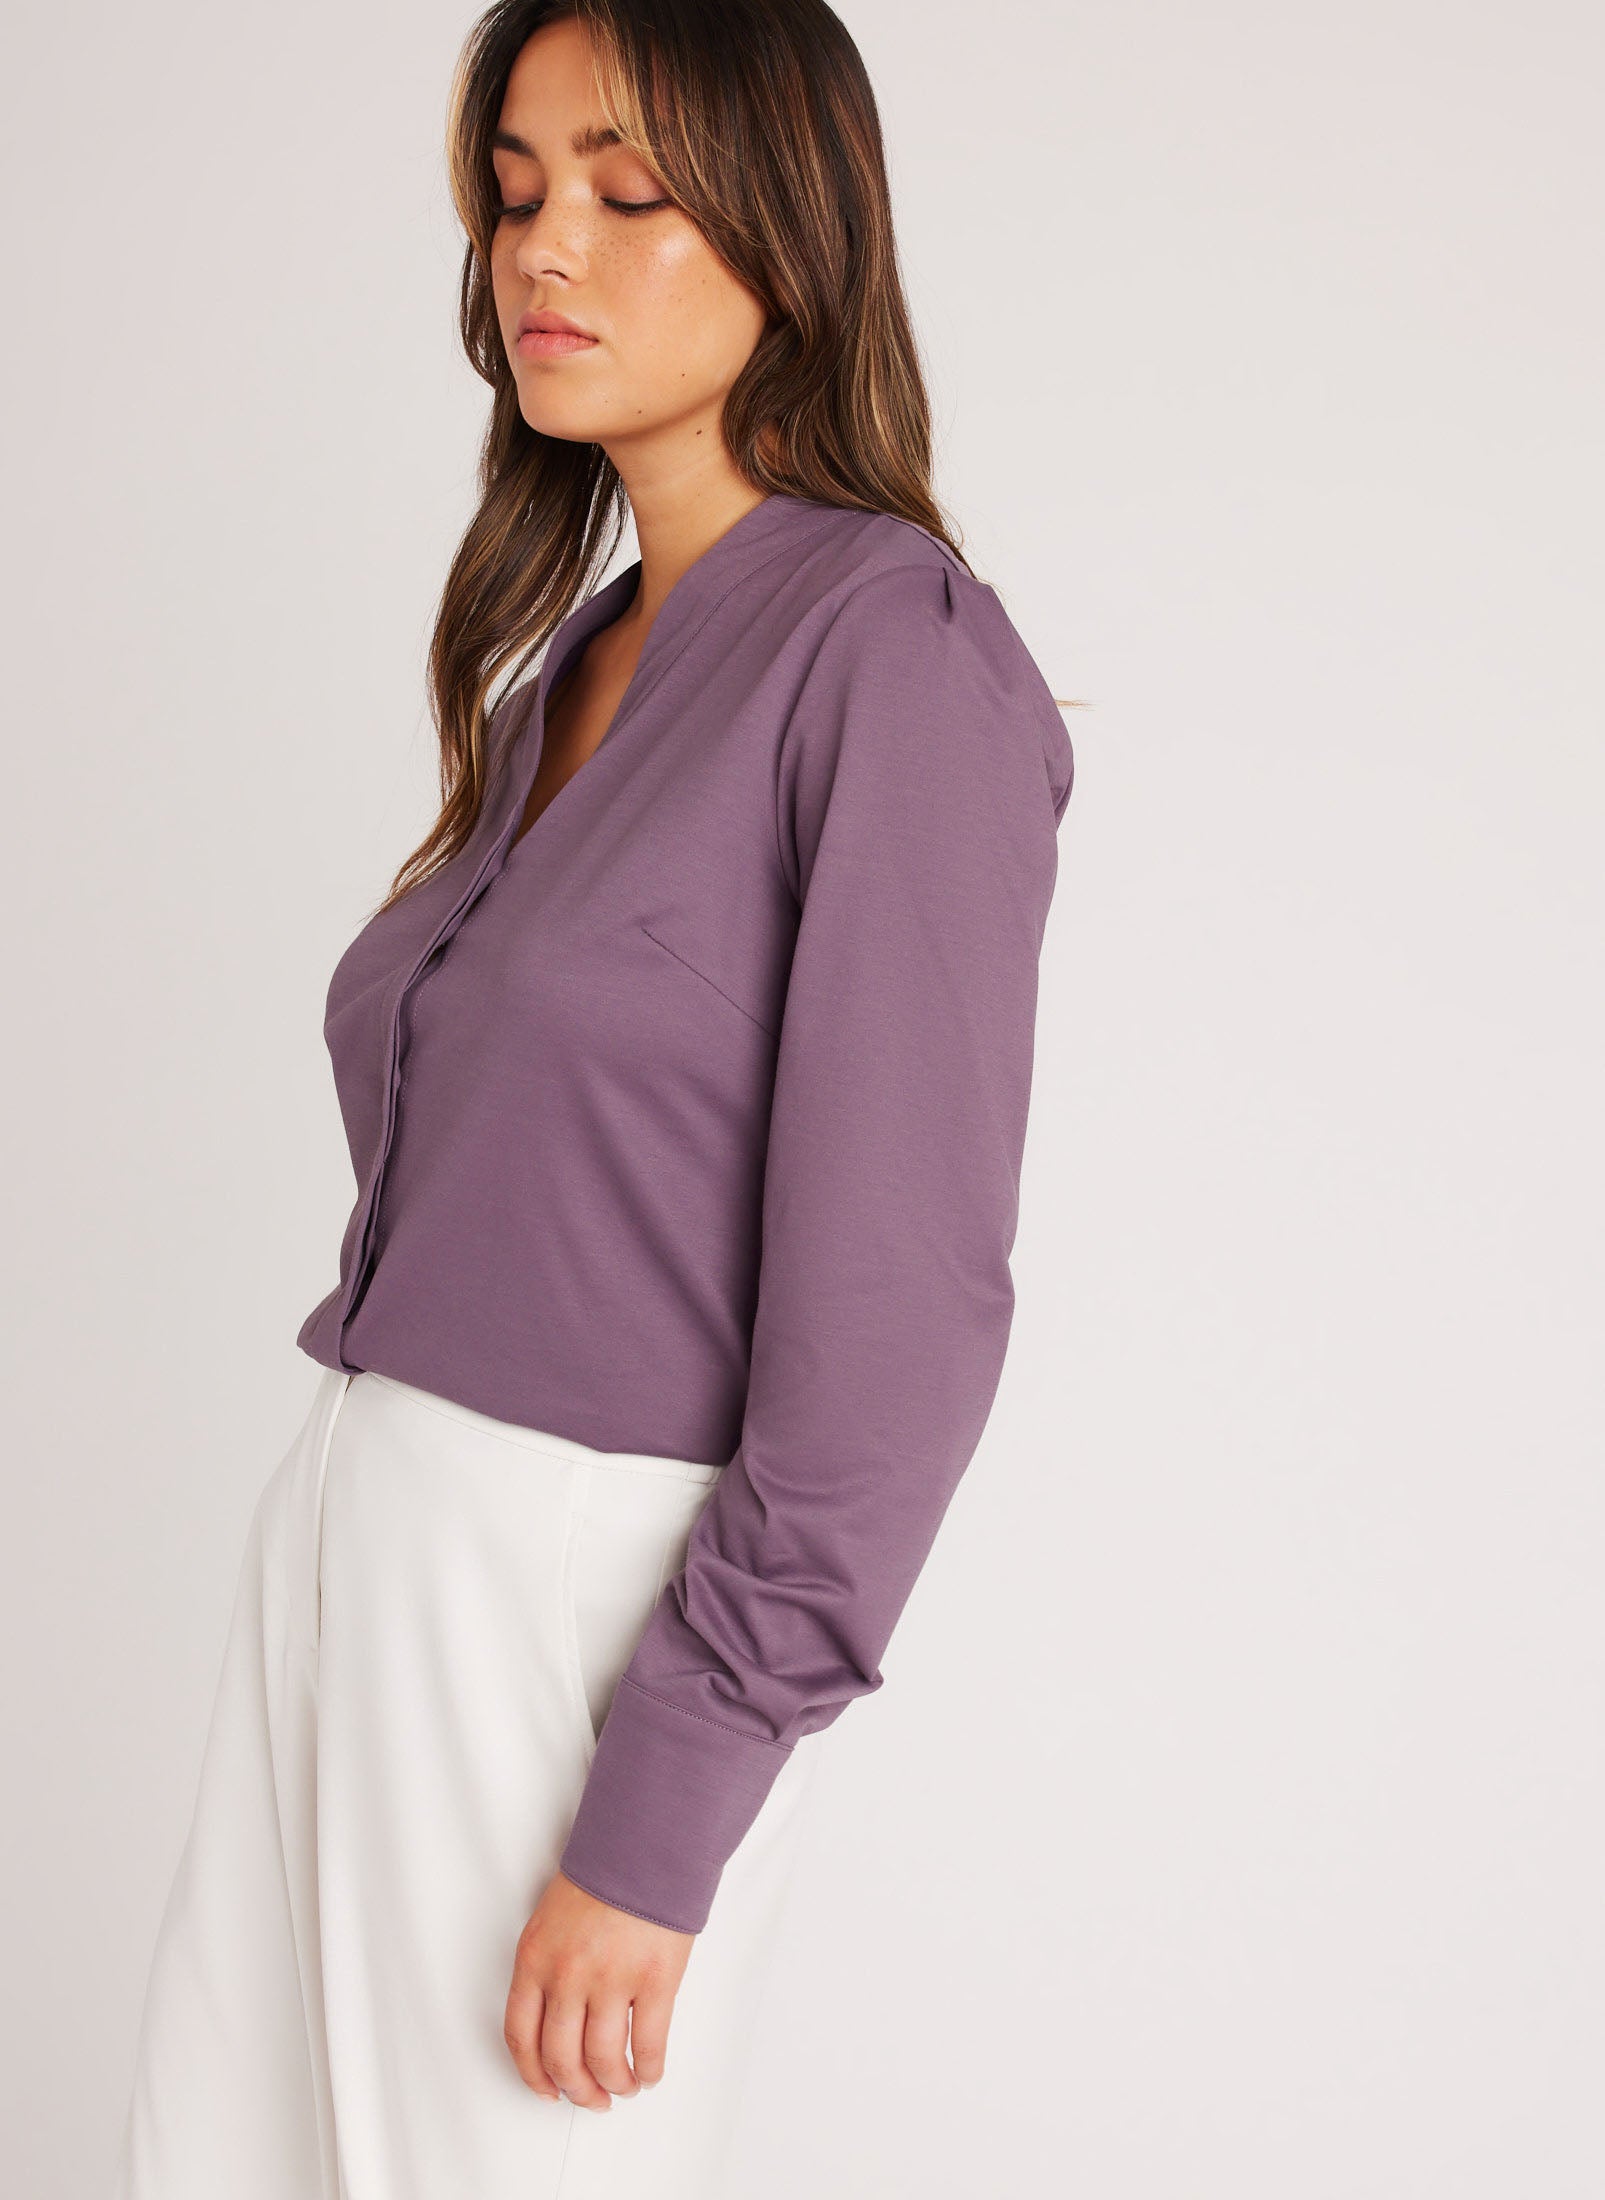 Women's Shirts & Blouses – Kit and Ace